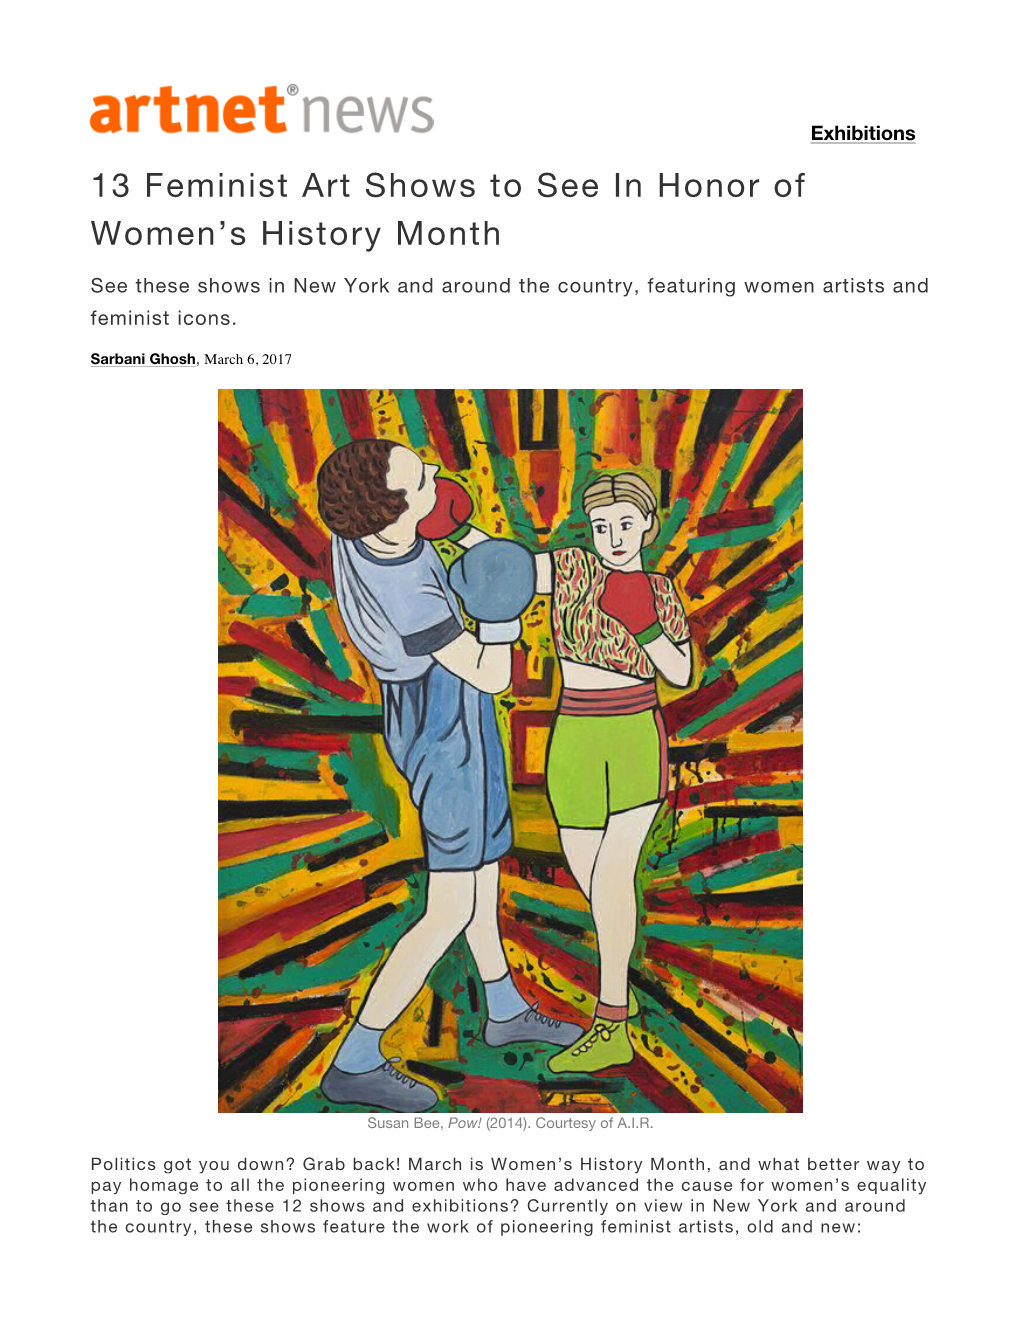 13 Feminist Art Shows to See in Honor of Women's History Month